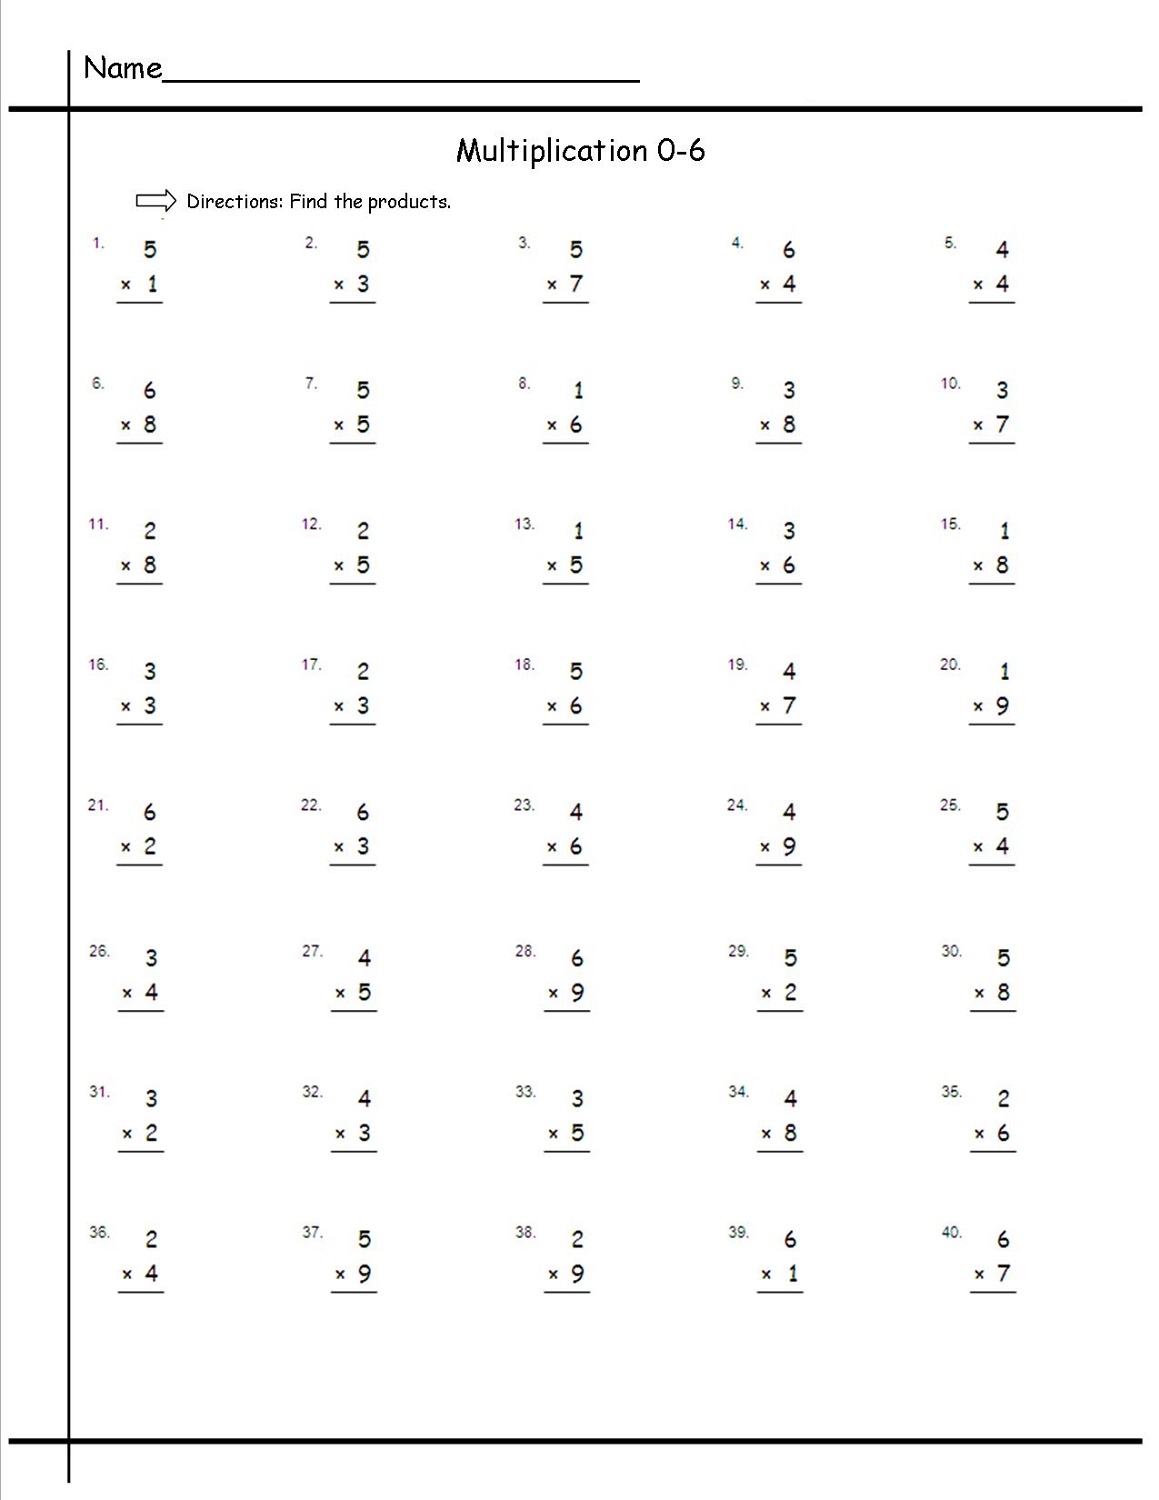 times table drills simple